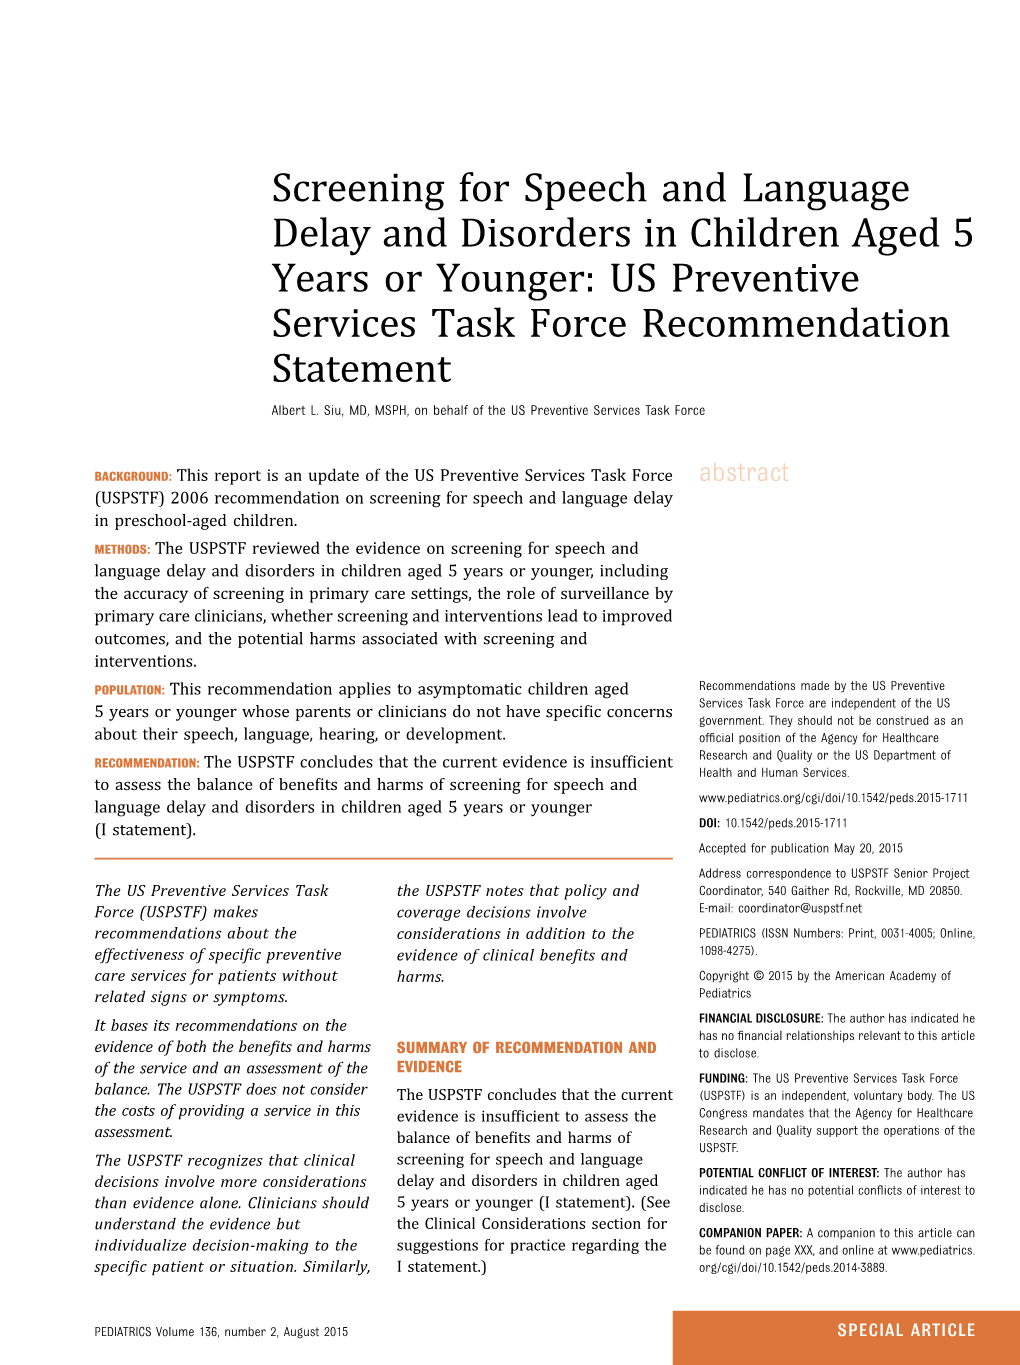 Screening for Speech and Language Delay and Disorders in Children Aged 5 Years Or Younger: US Preventive Services Task Force Recommendation Statement Albert L